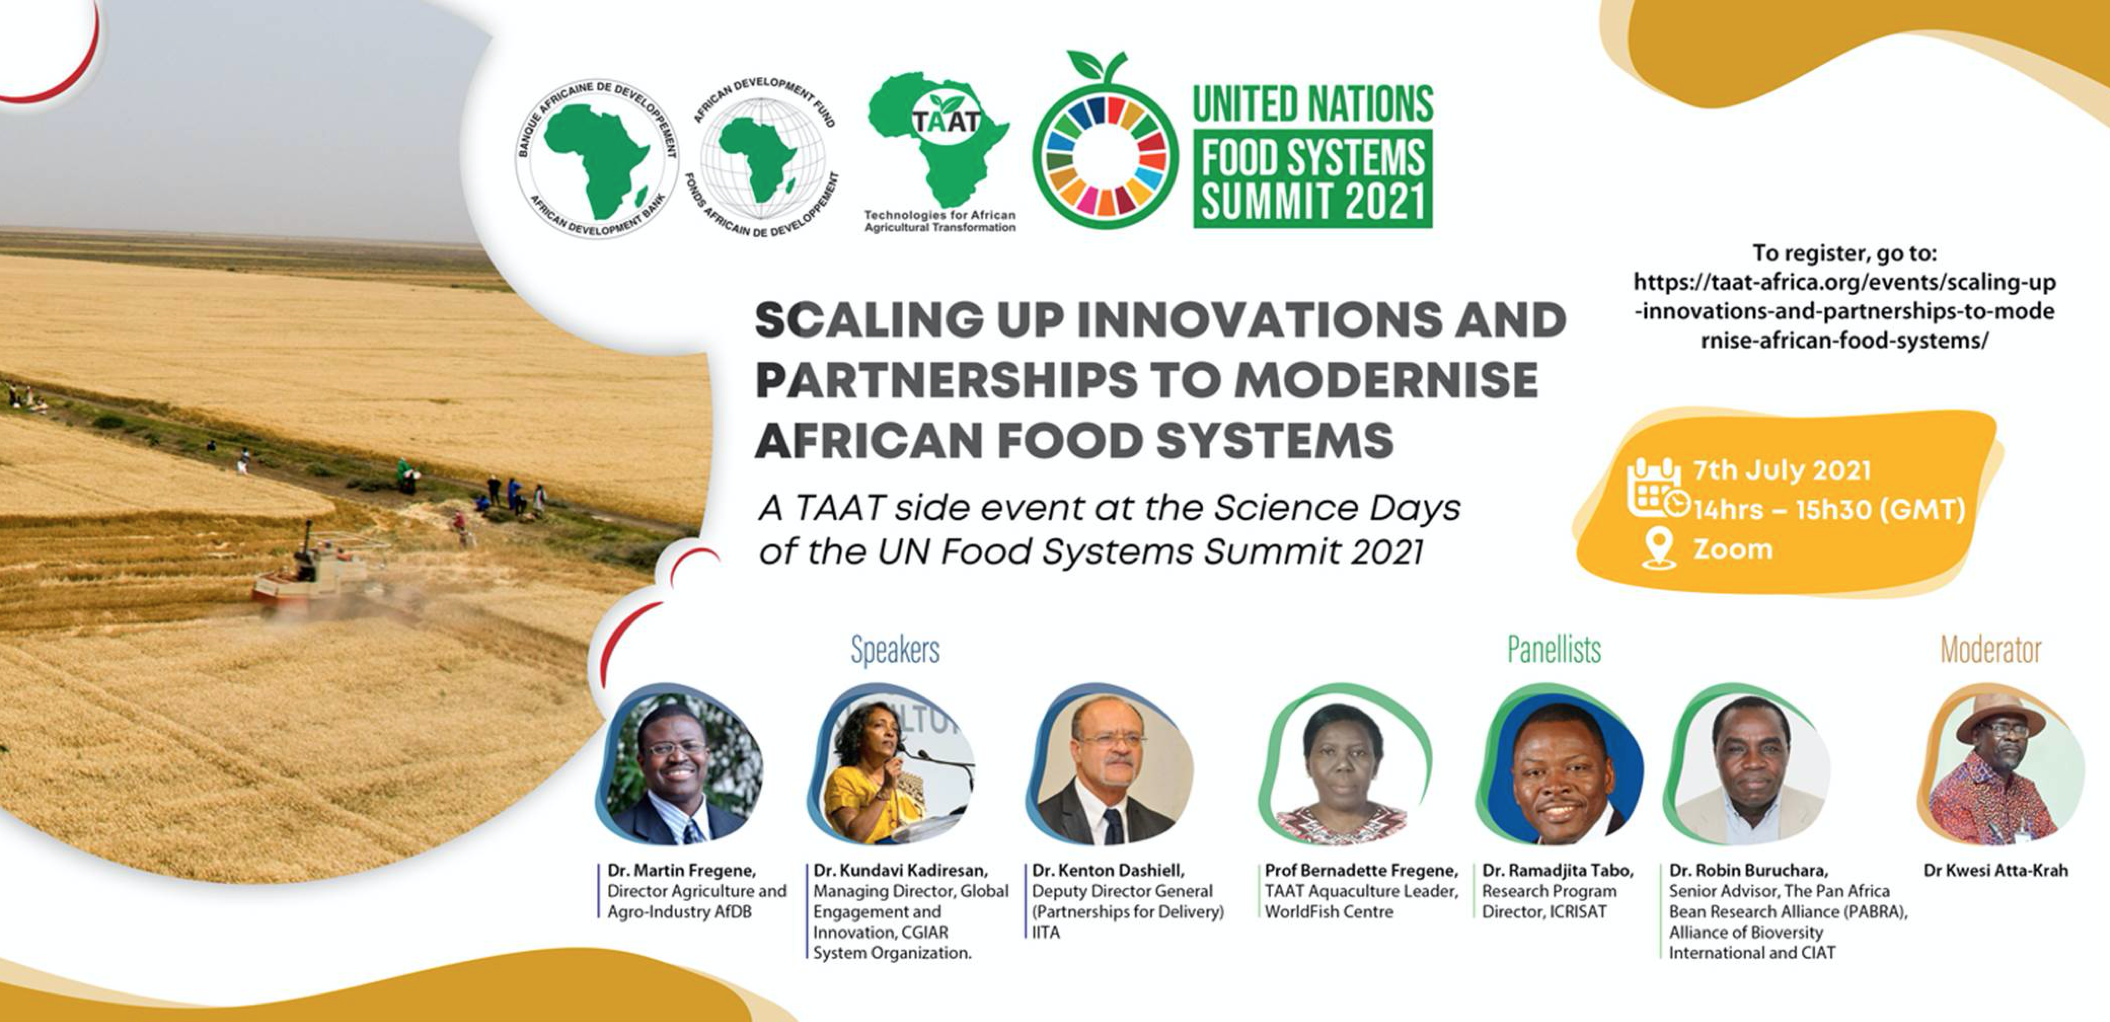 Scaling up innovations and partnerships to modernize African food systems